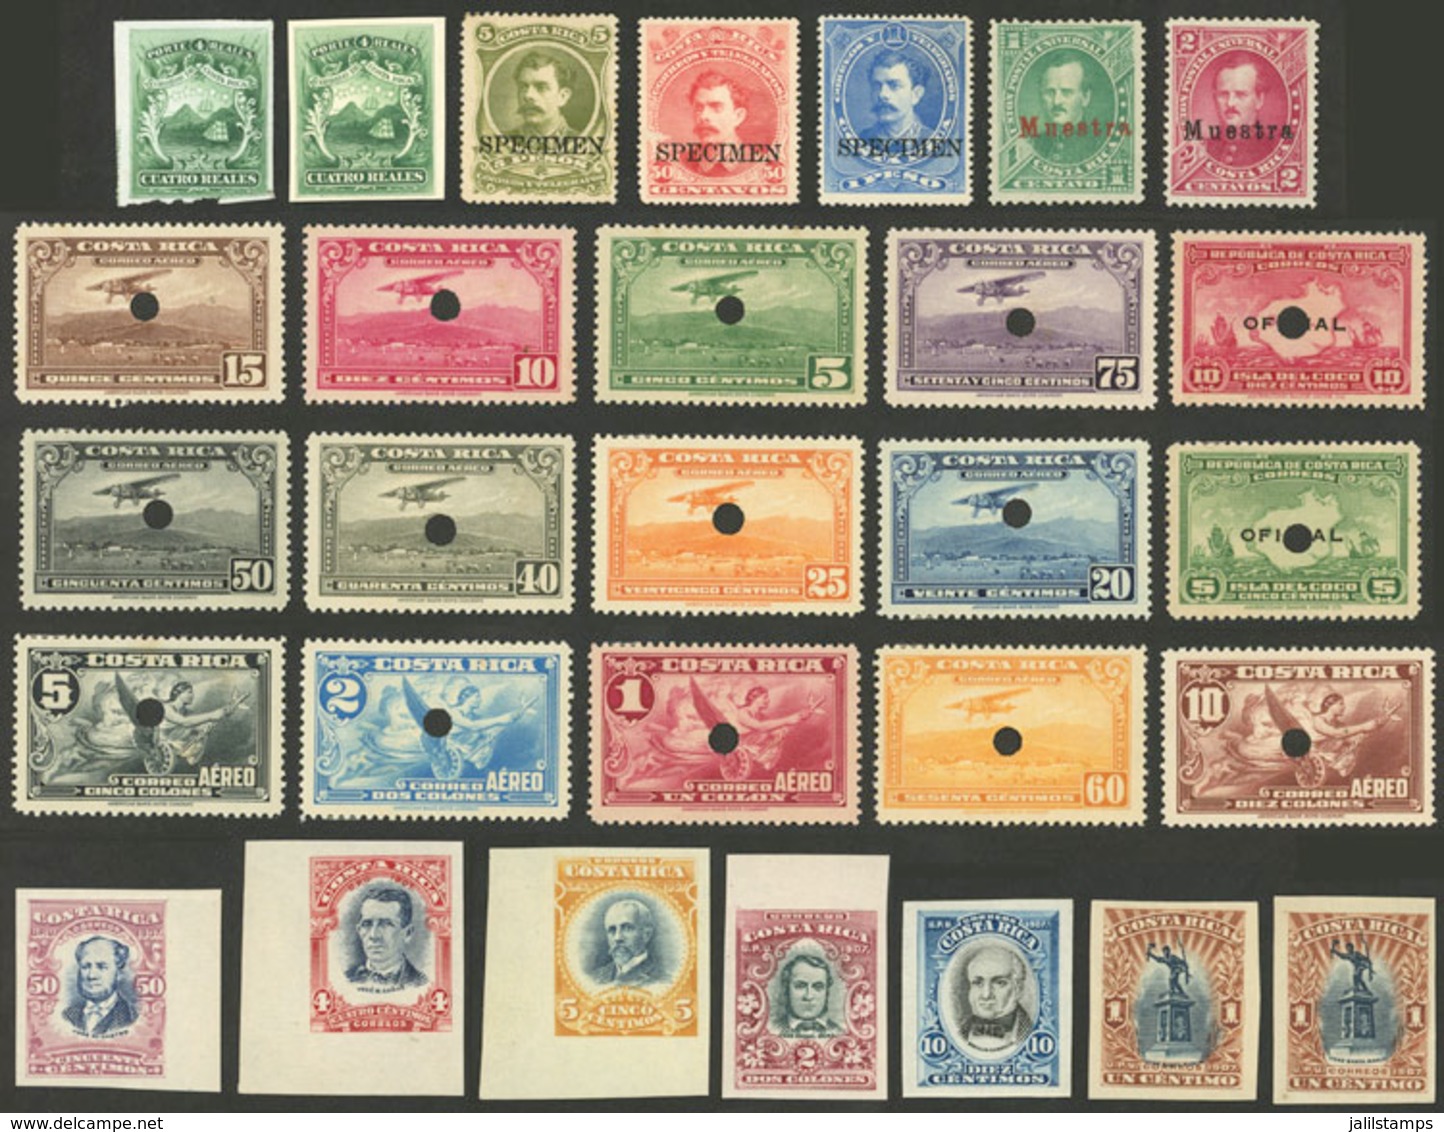 COSTA RICA: PROOFS, Specimens, Etc., Interesting Lot Of About 29 Stamps, Including Some Imperforate Examples, And 2 Tria - Costa Rica